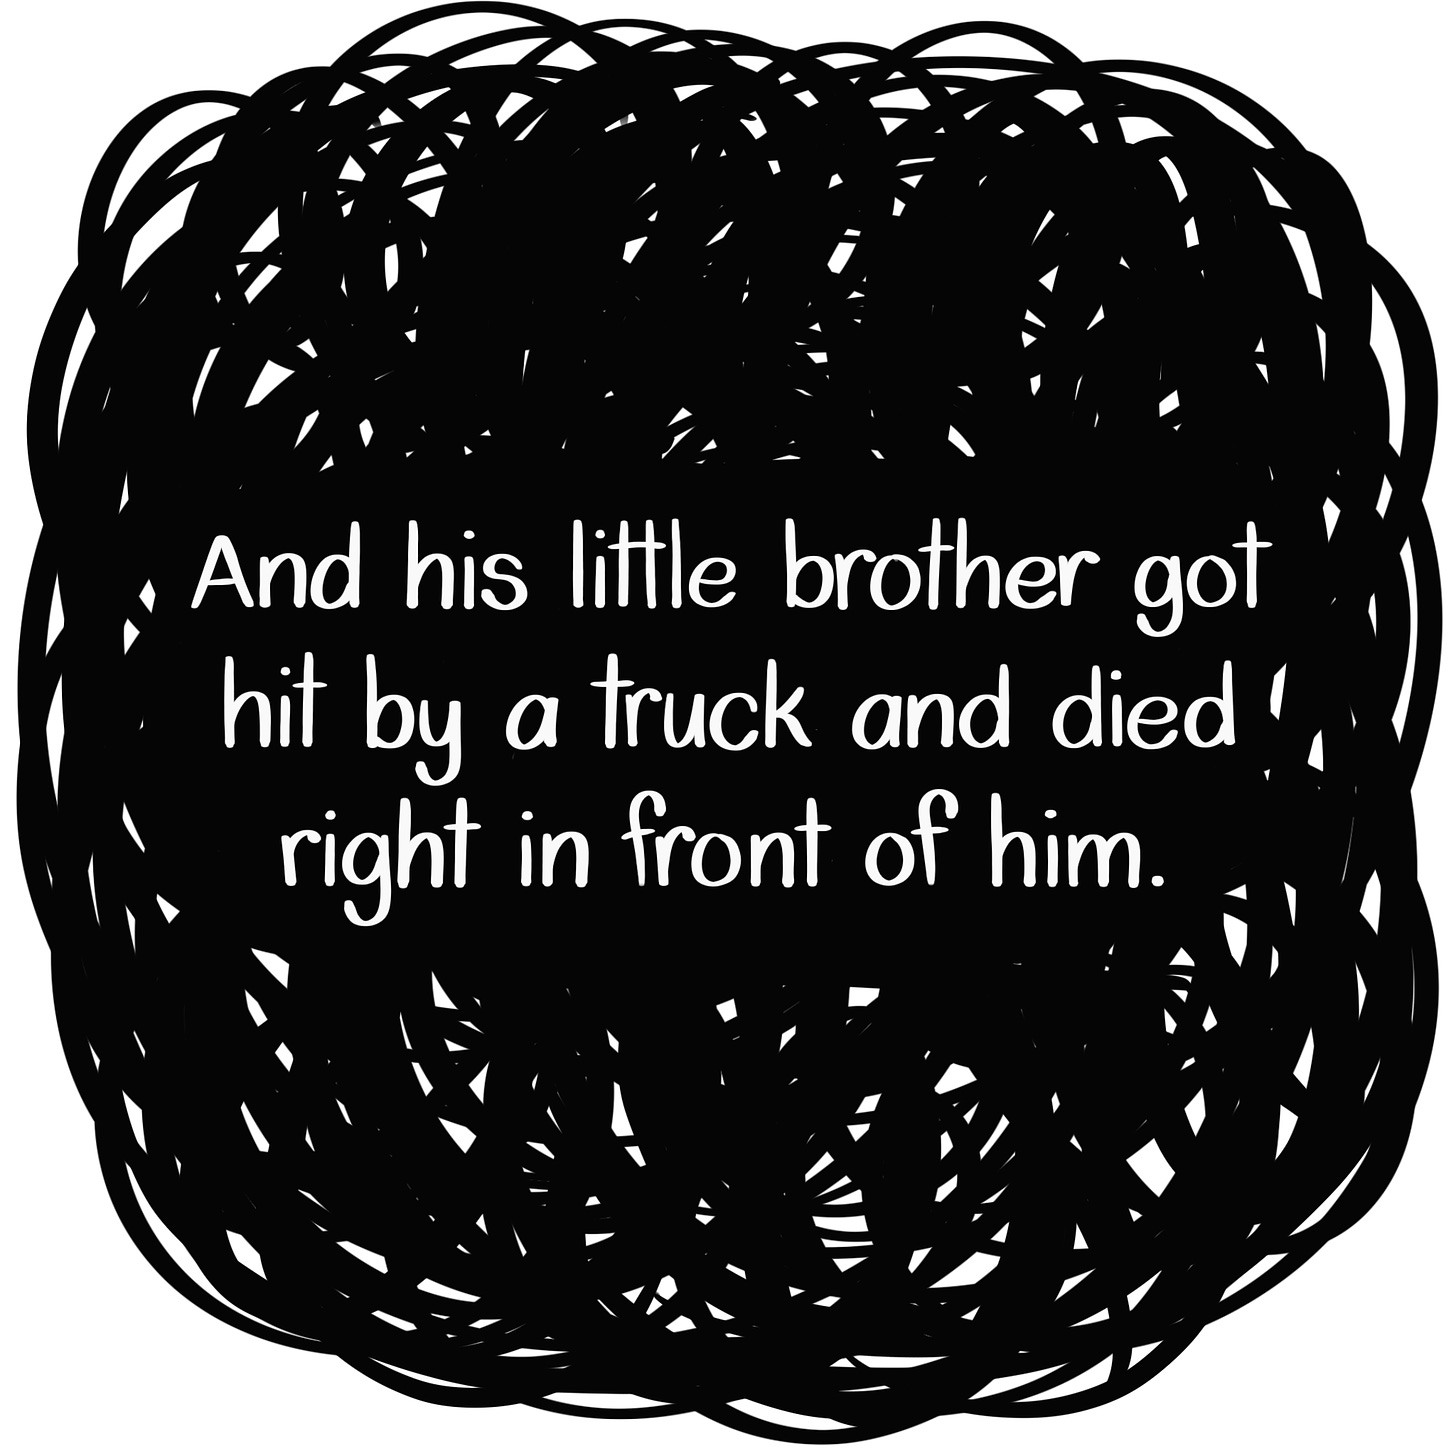 Caption: And his little brother got hit by a truck and died right in front of him. Image: White text in front of more condensed, thick black scribbles.